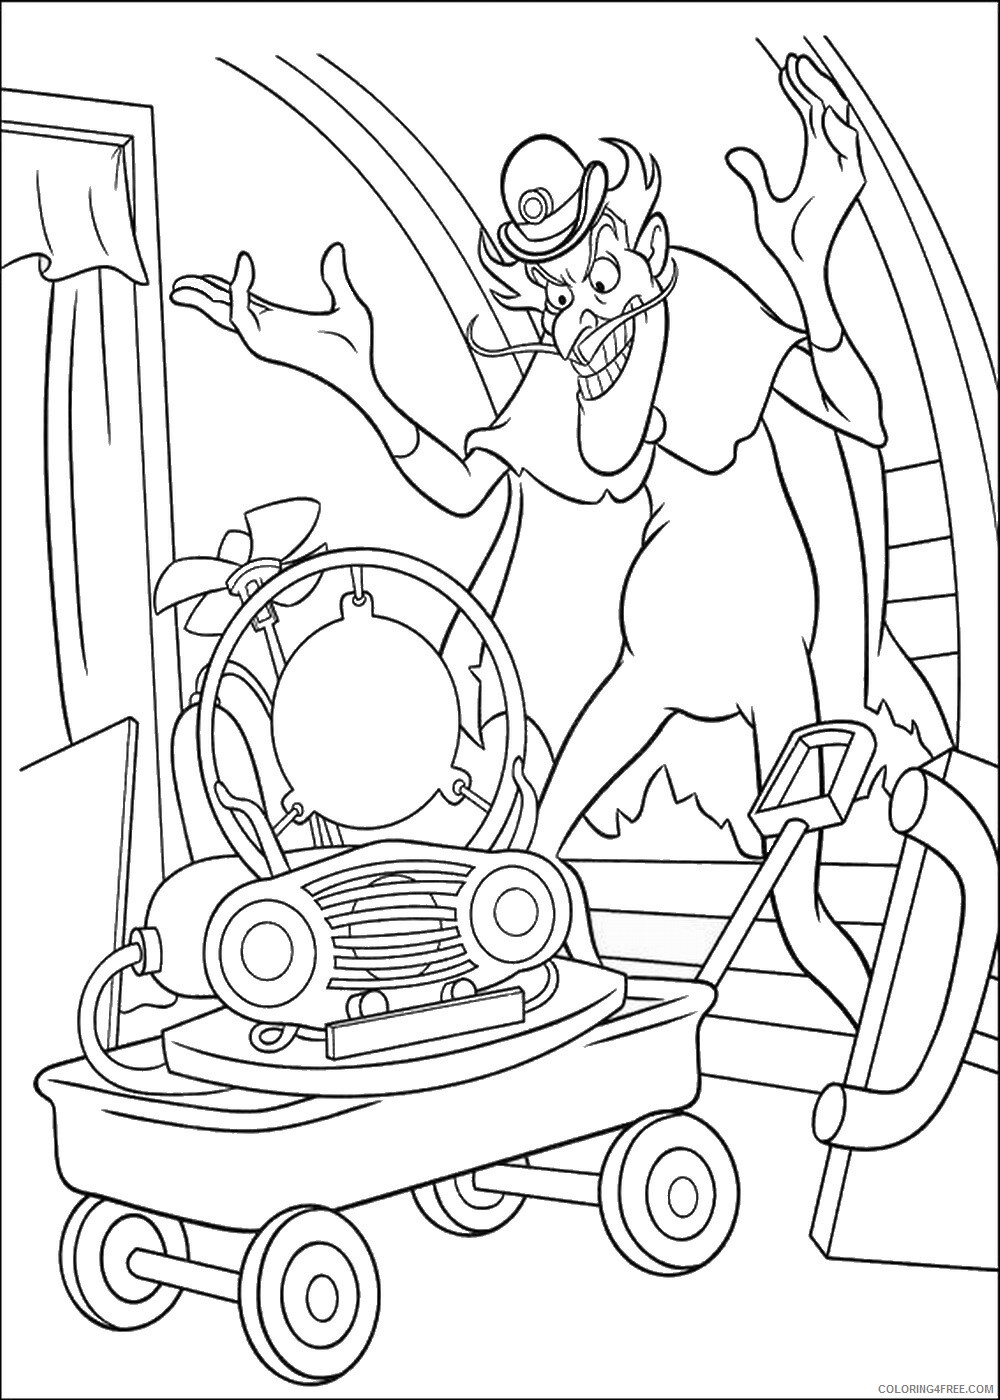 Meet the Robinsons Coloring Pages TV Film meet_the_robinsons Printable 2020 04985 Coloring4free